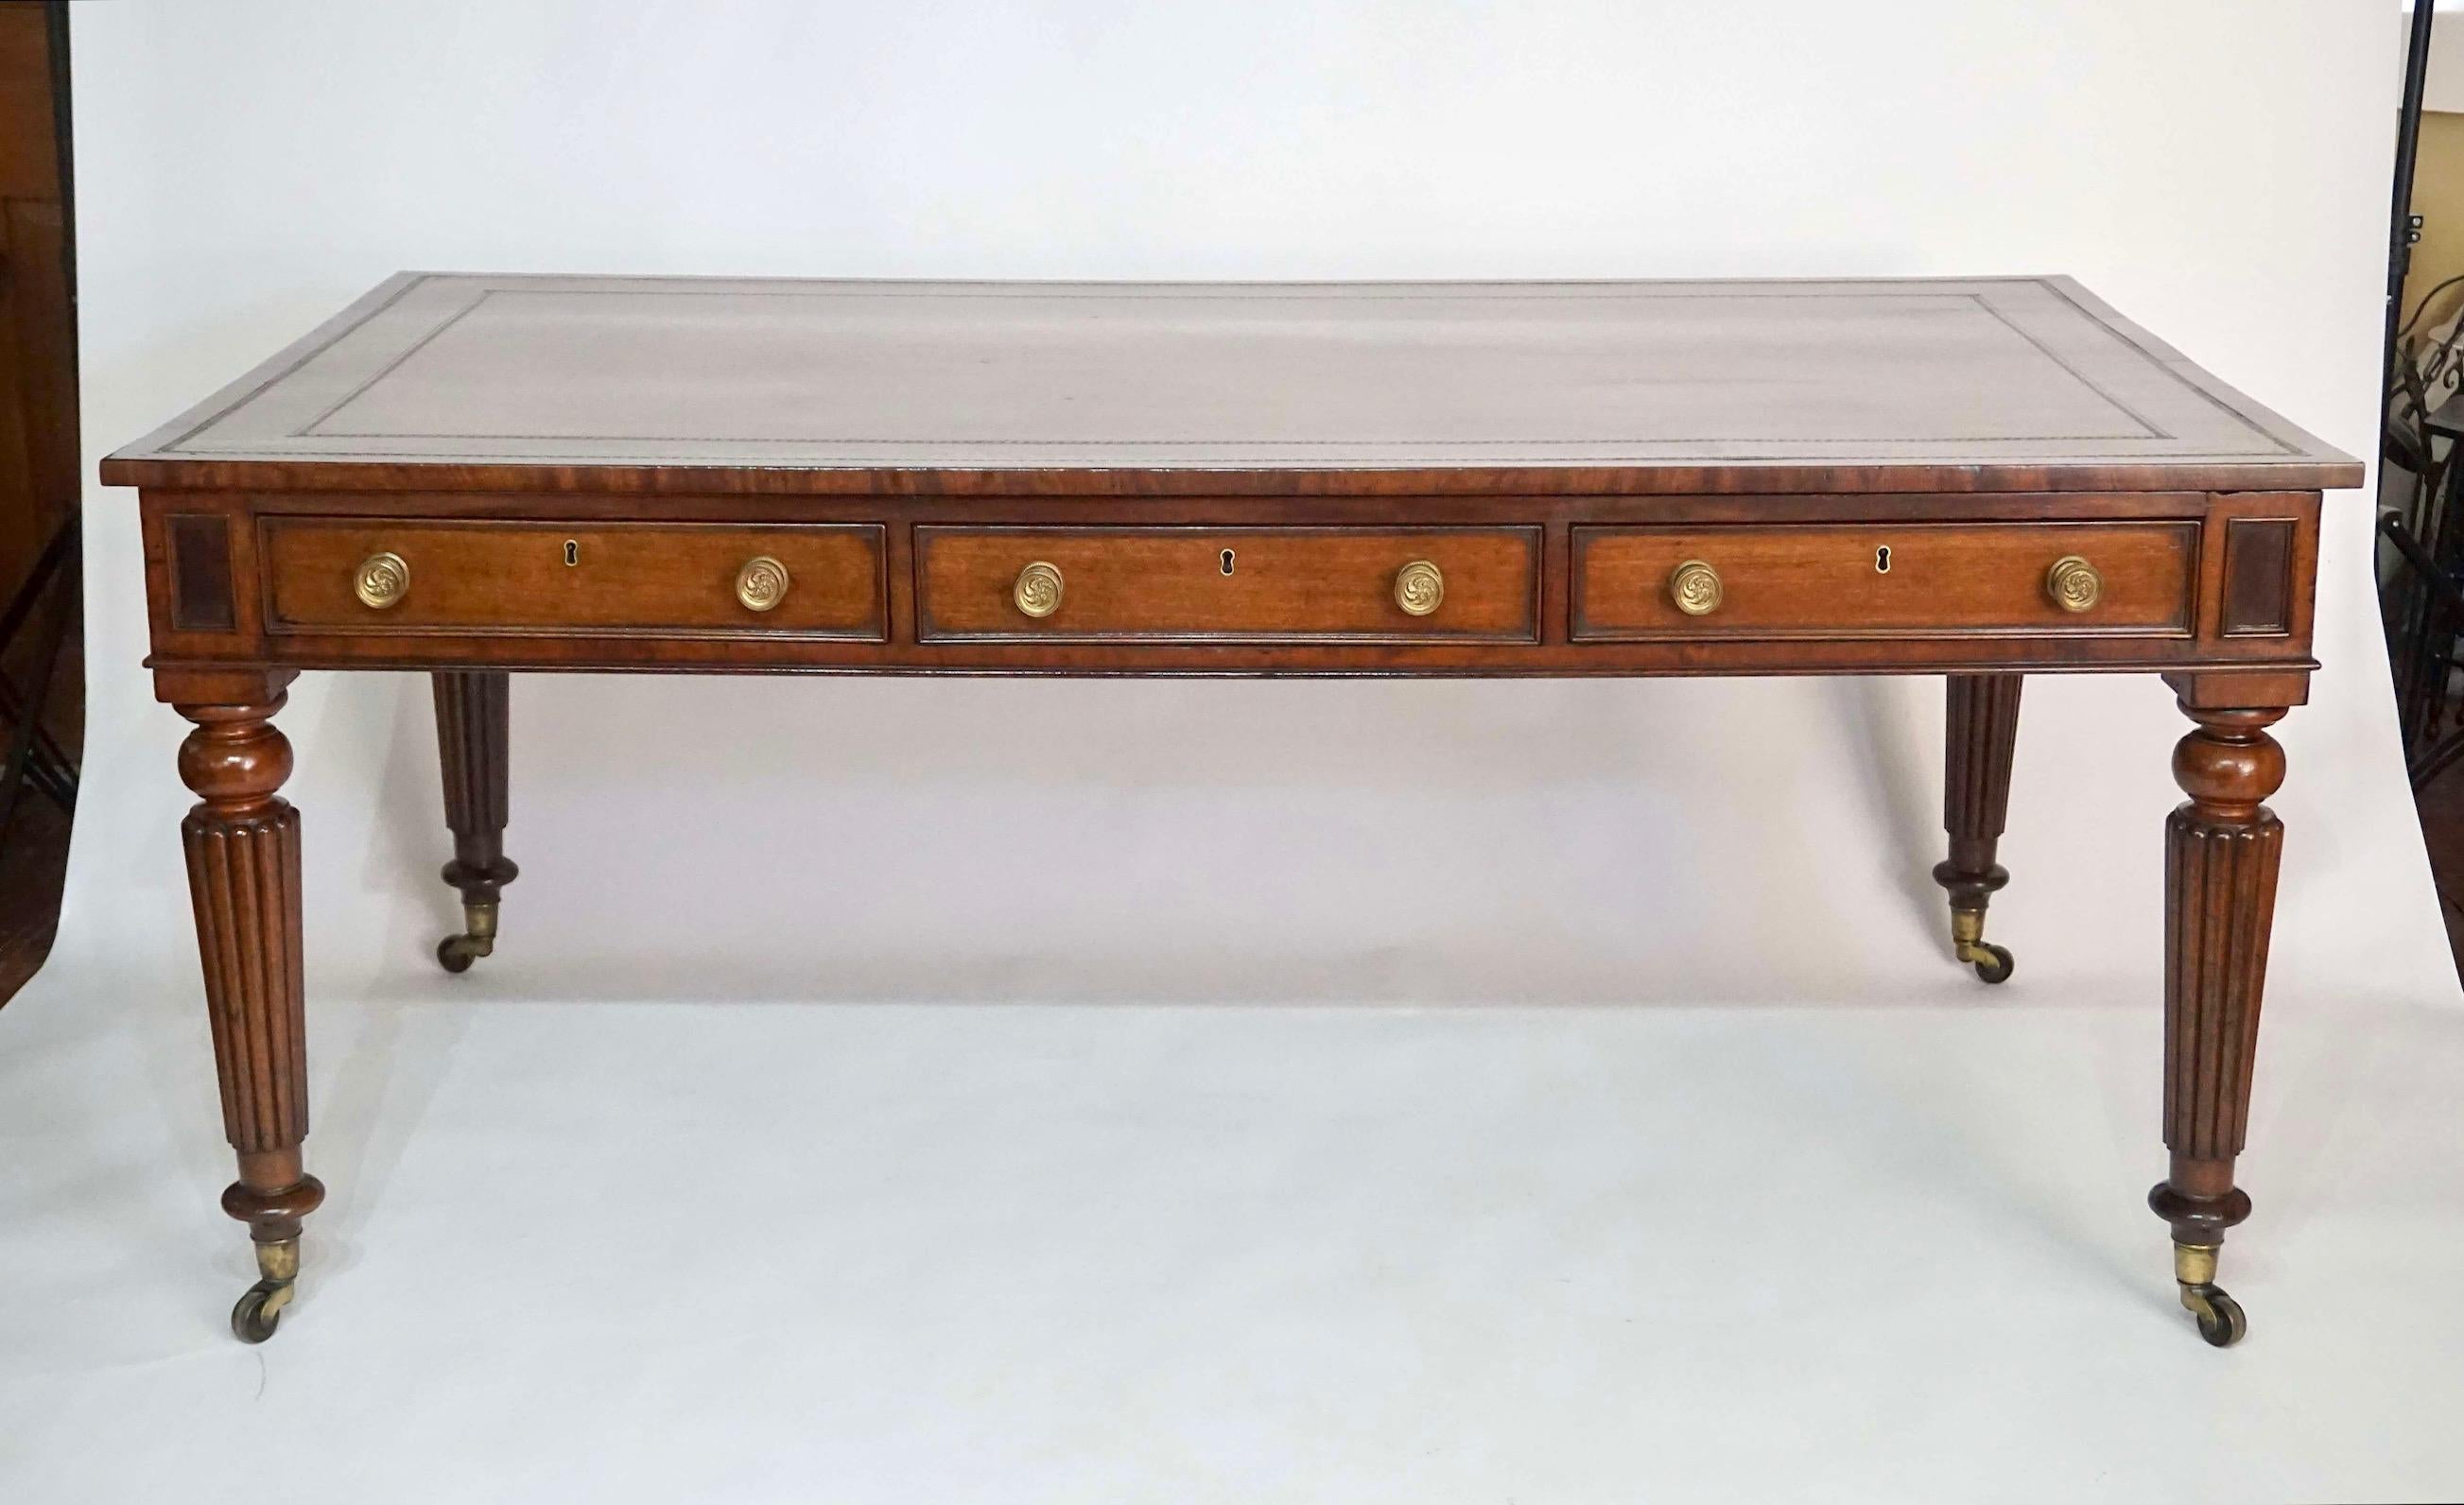 A fine circa 1820 English Regency period double-sided library or writing table of large rectangular form, the gilt-tooled brown leather inset top with square edge above bookended corners with rectangular ogee molded burled wood reserves, long aprons